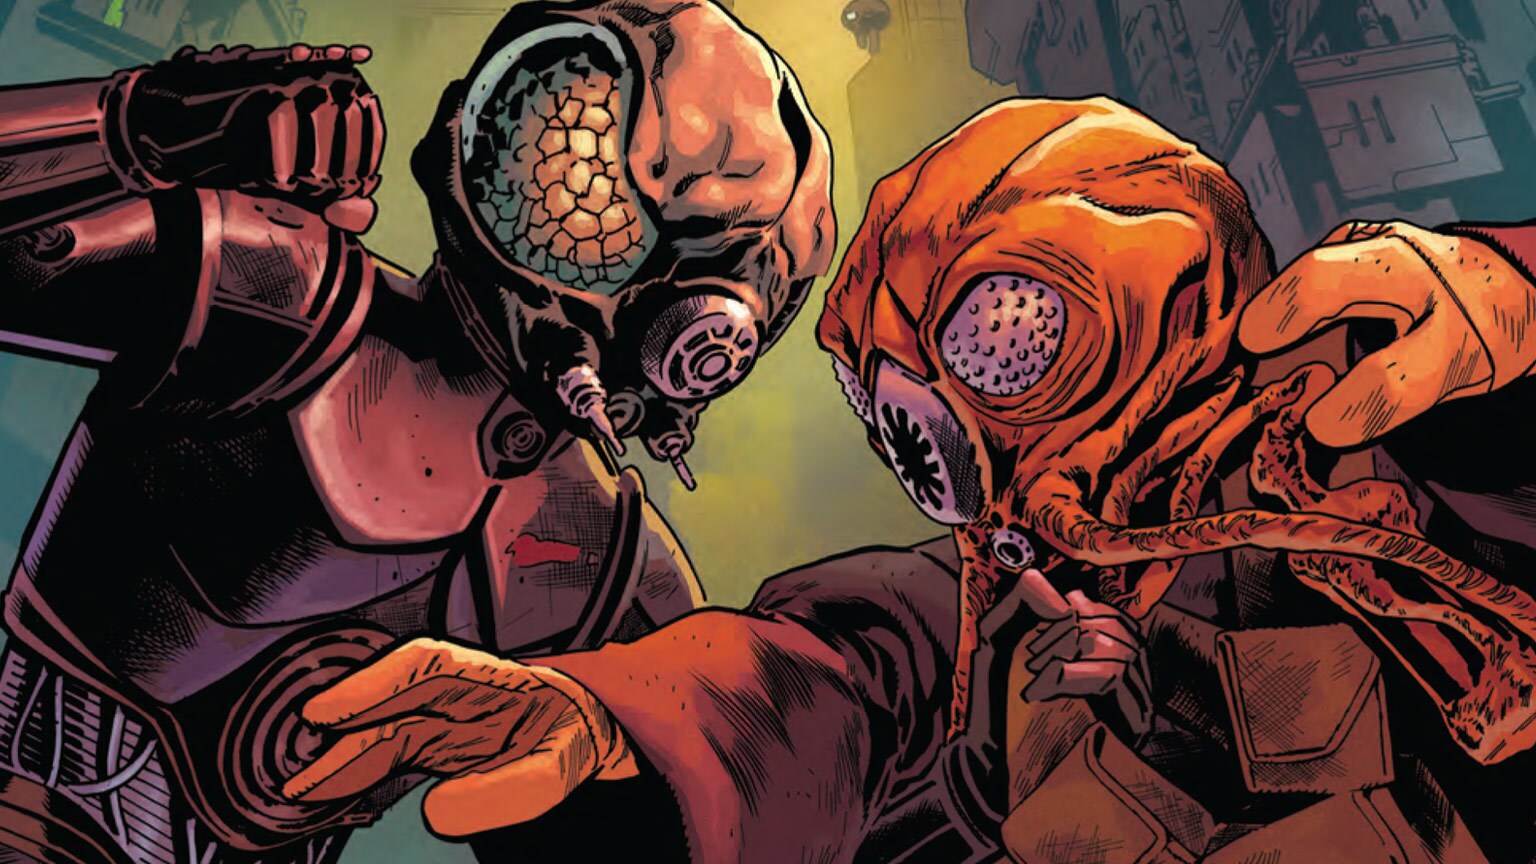 A Deadly Duo Rises in Marvel’s Star Wars: War of the Bounty Hunters: 4-LOM & Zuckuss #1 - Exclusive Preview